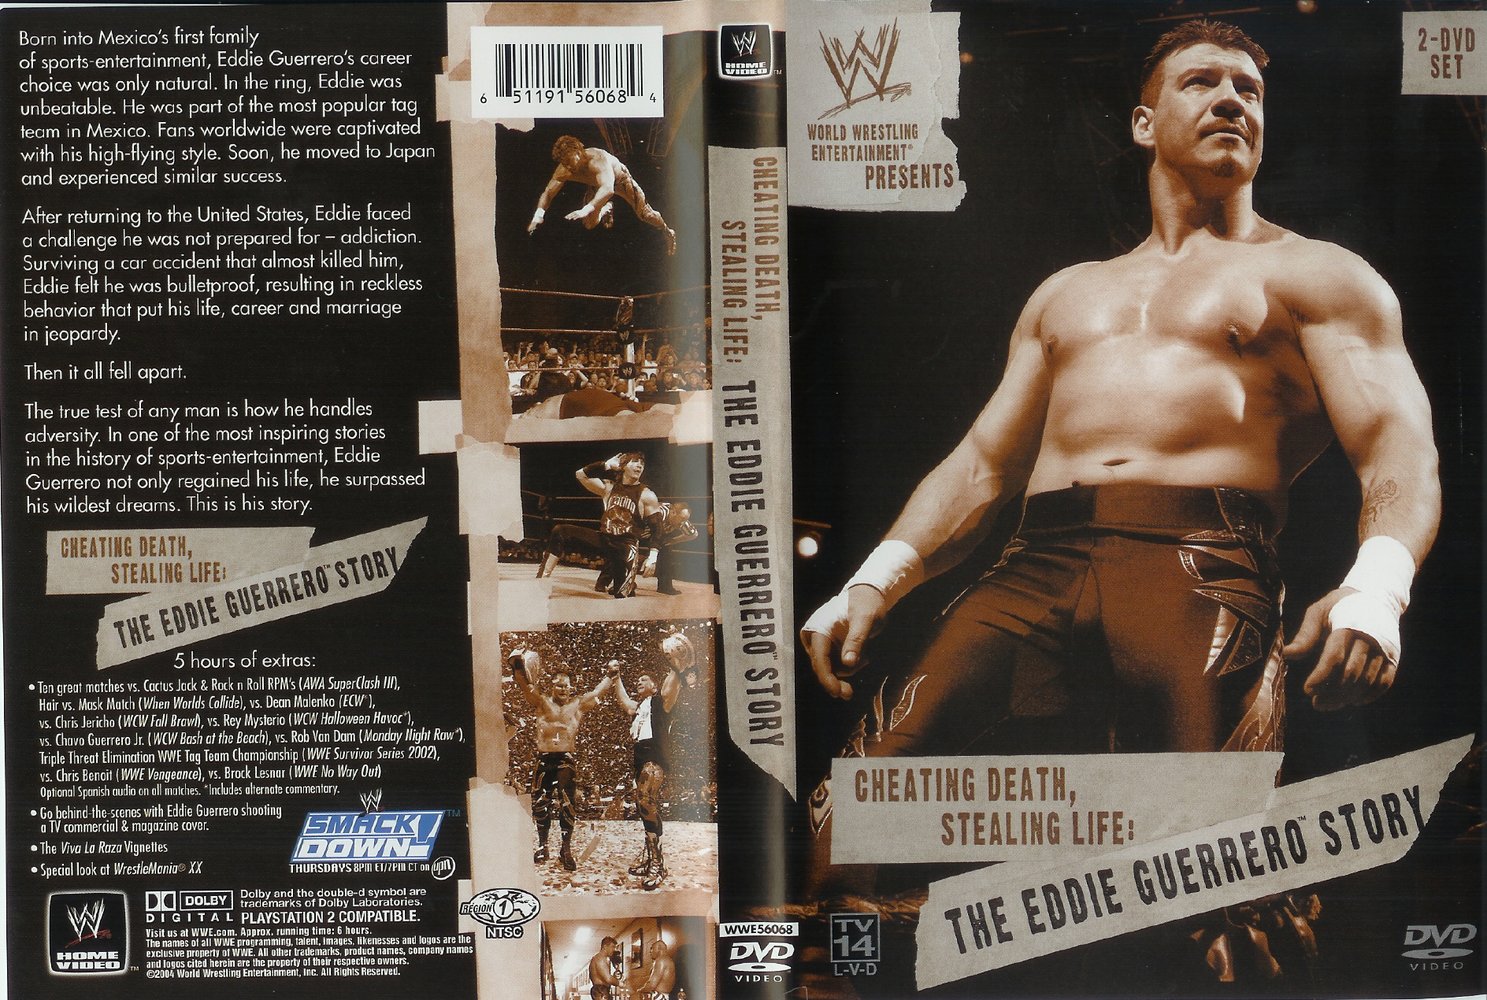 Jaquette DVD de WWE Cheating death Stealing Life The Eddie Guerrero